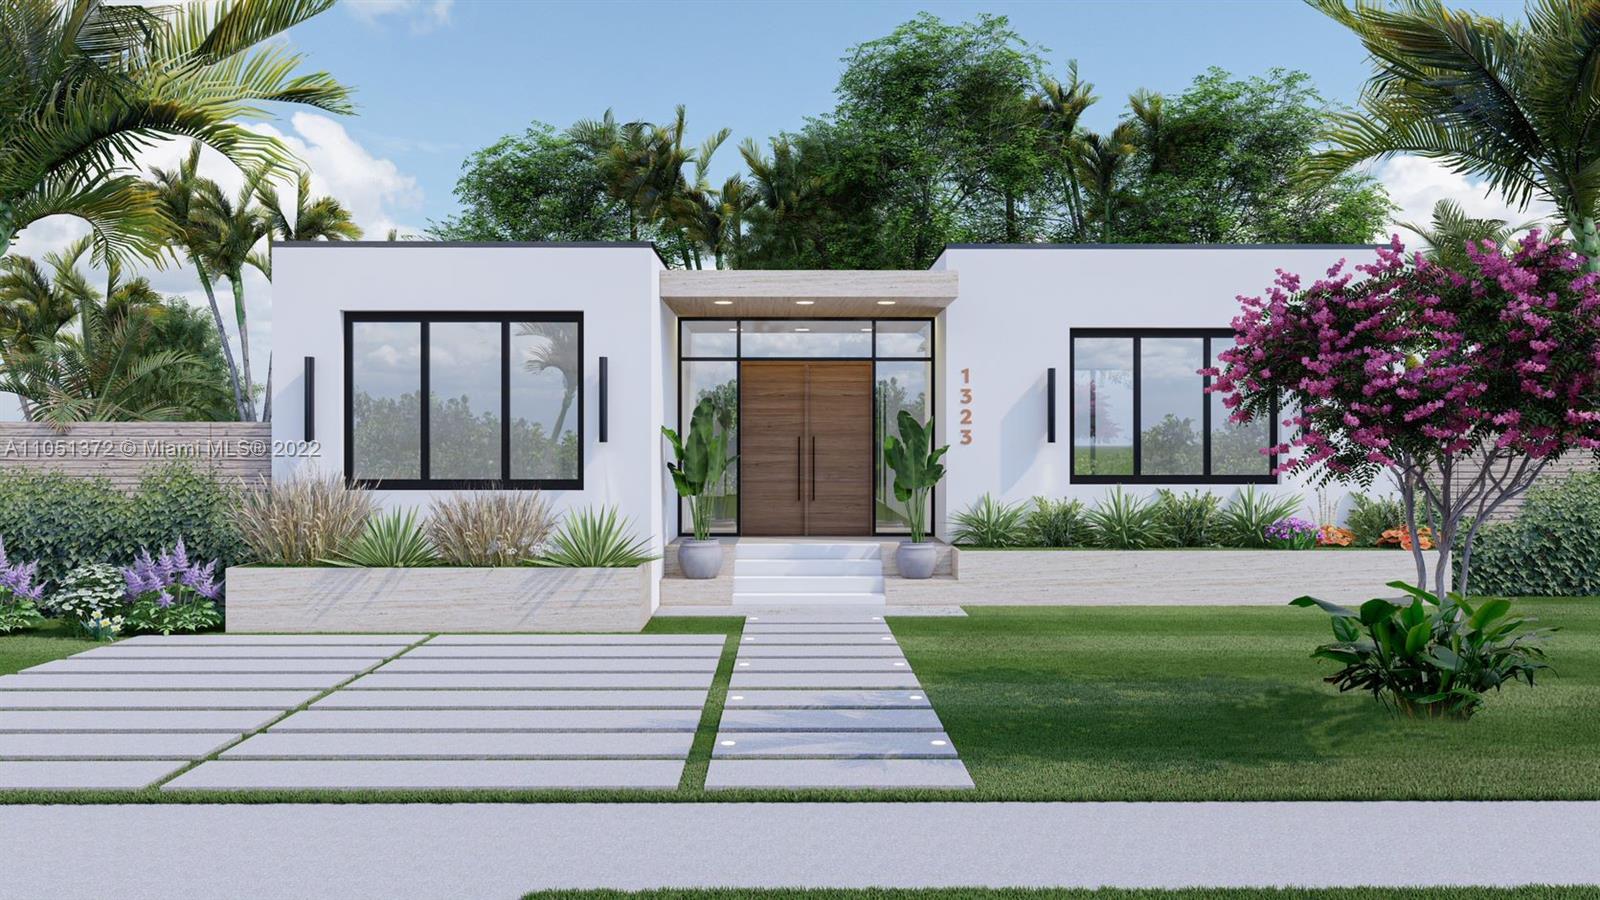 Biscayne Point, beautiful gated Island in Miami Beach. Large 3/2 home, could be converted in to a large 4 bedroom home.
Ready to be fully remodeled by buyer to there personal taste, solid concrete home with nice elevation and high ceilings. room for a pool.